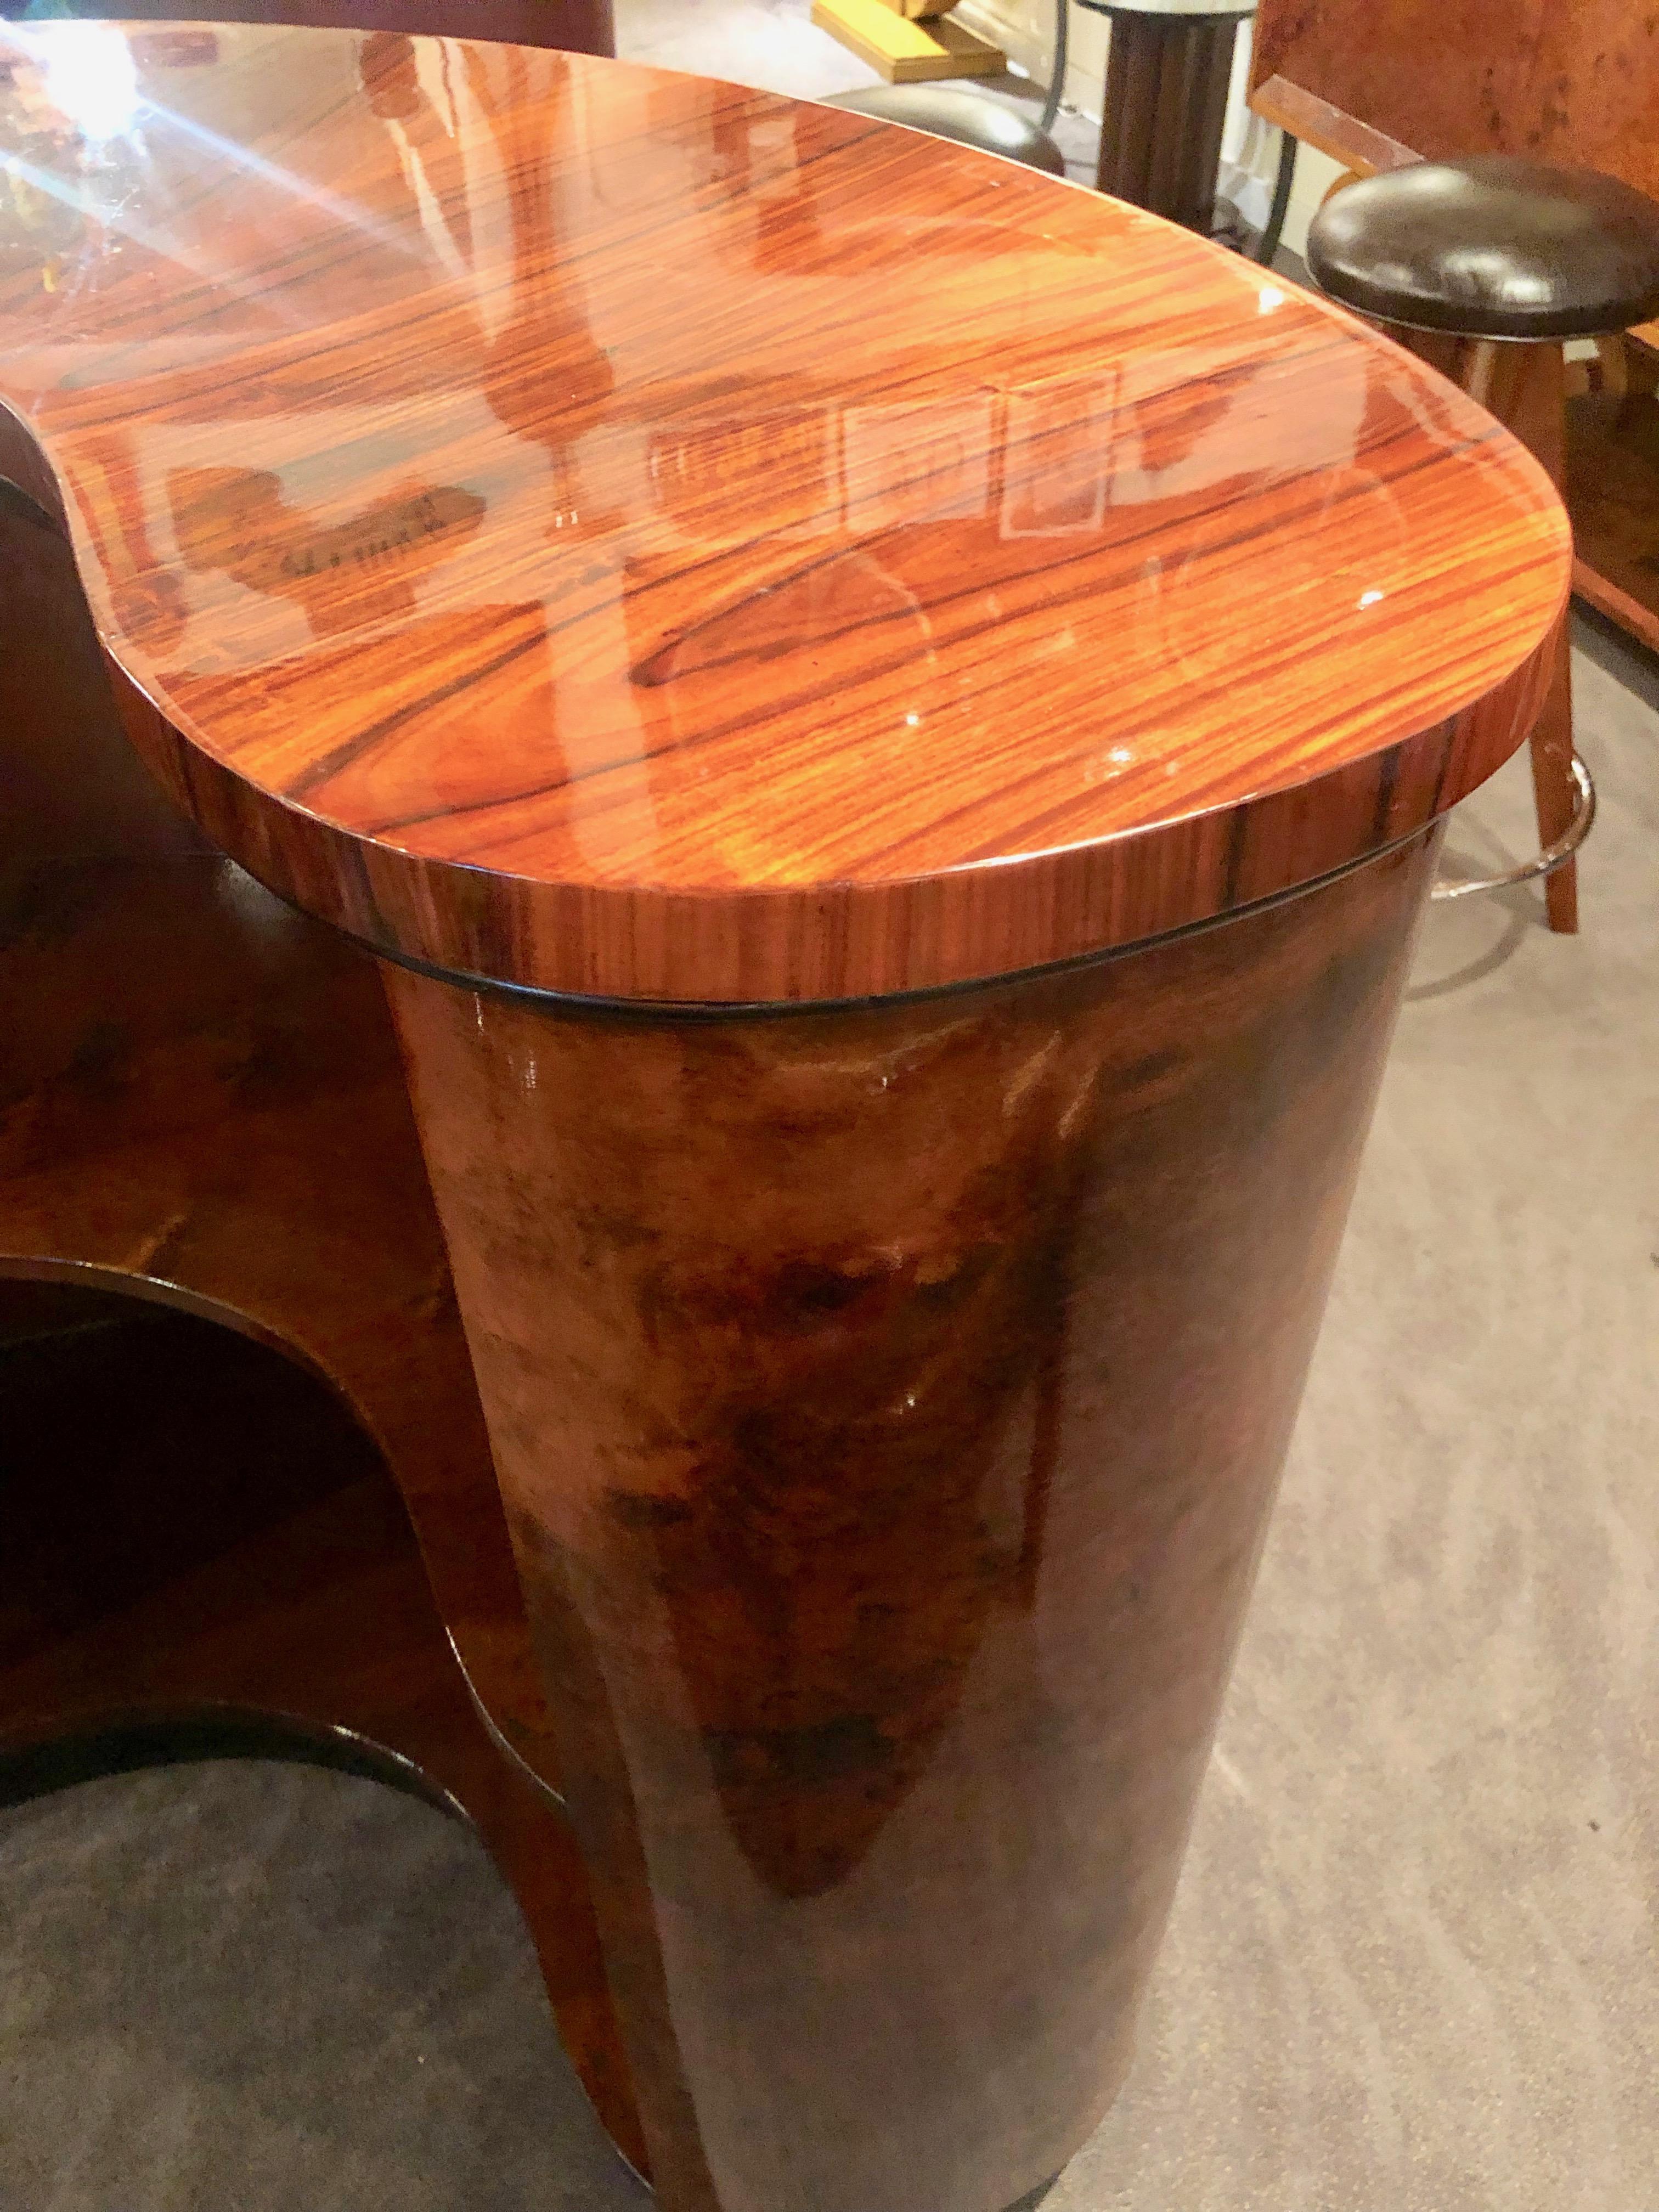 Burl walnut Art Deco round stand behind bar. Incredible bookmatched veneer wood with precision grain match to help create a one of kind home bar. Original vintage piece! Perfect size to fit anywhere in your home: living room, dining room, kitchen or